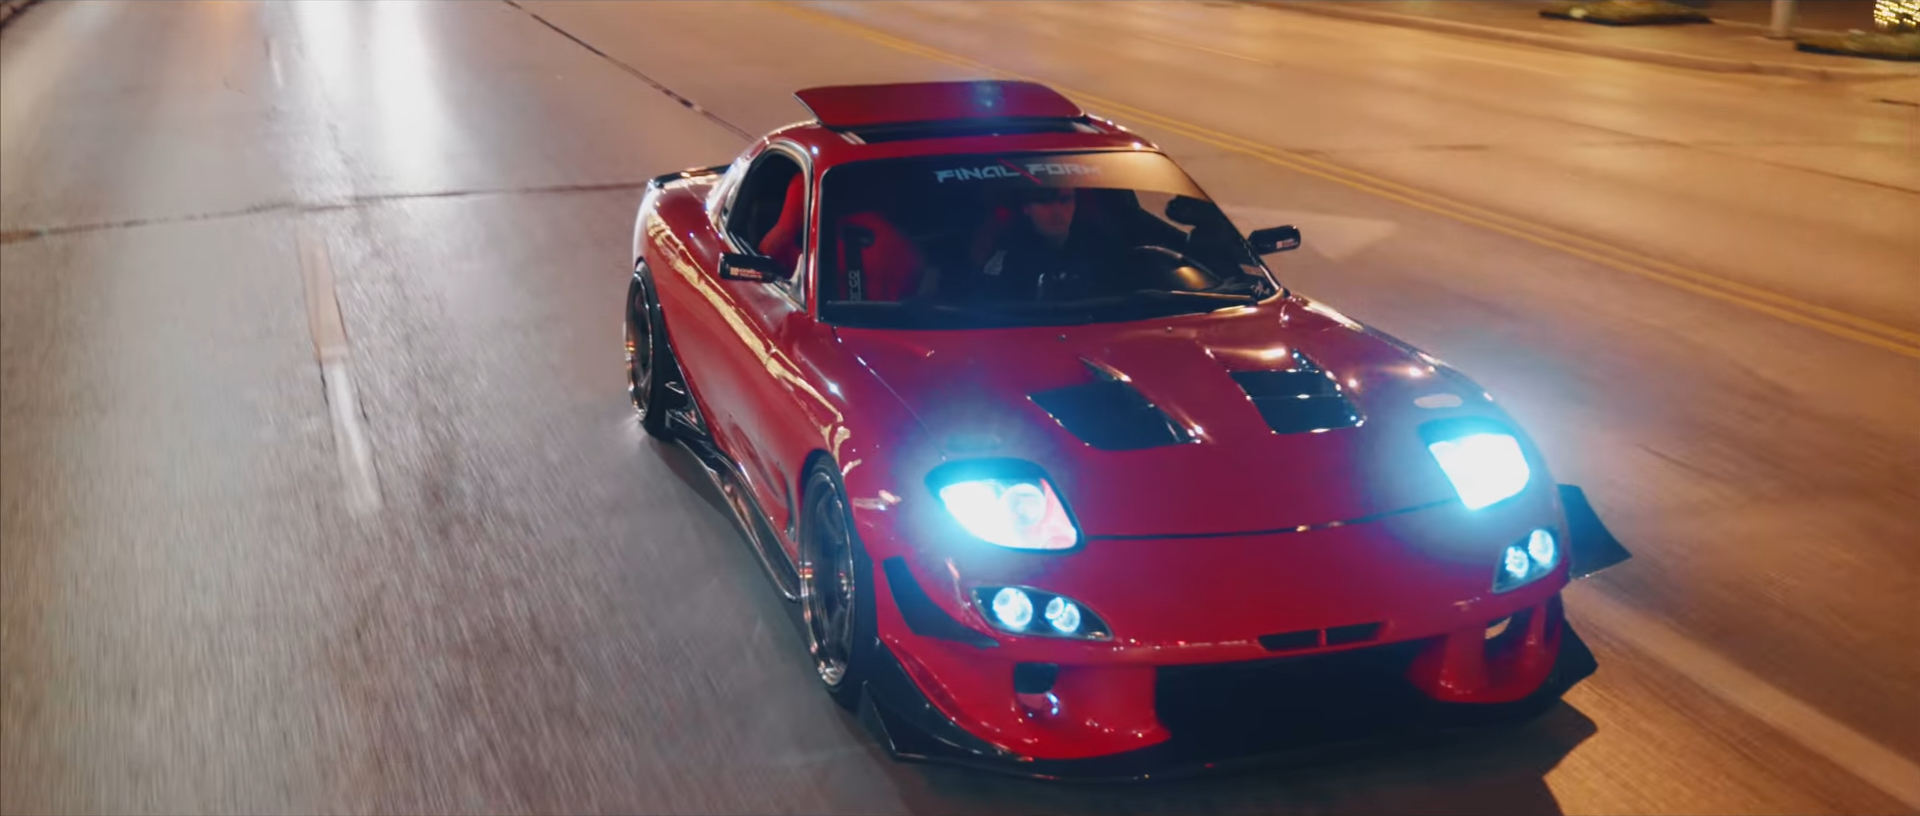 Final Form’s Street-Style RX-7 Is An Exercise Of Constraint